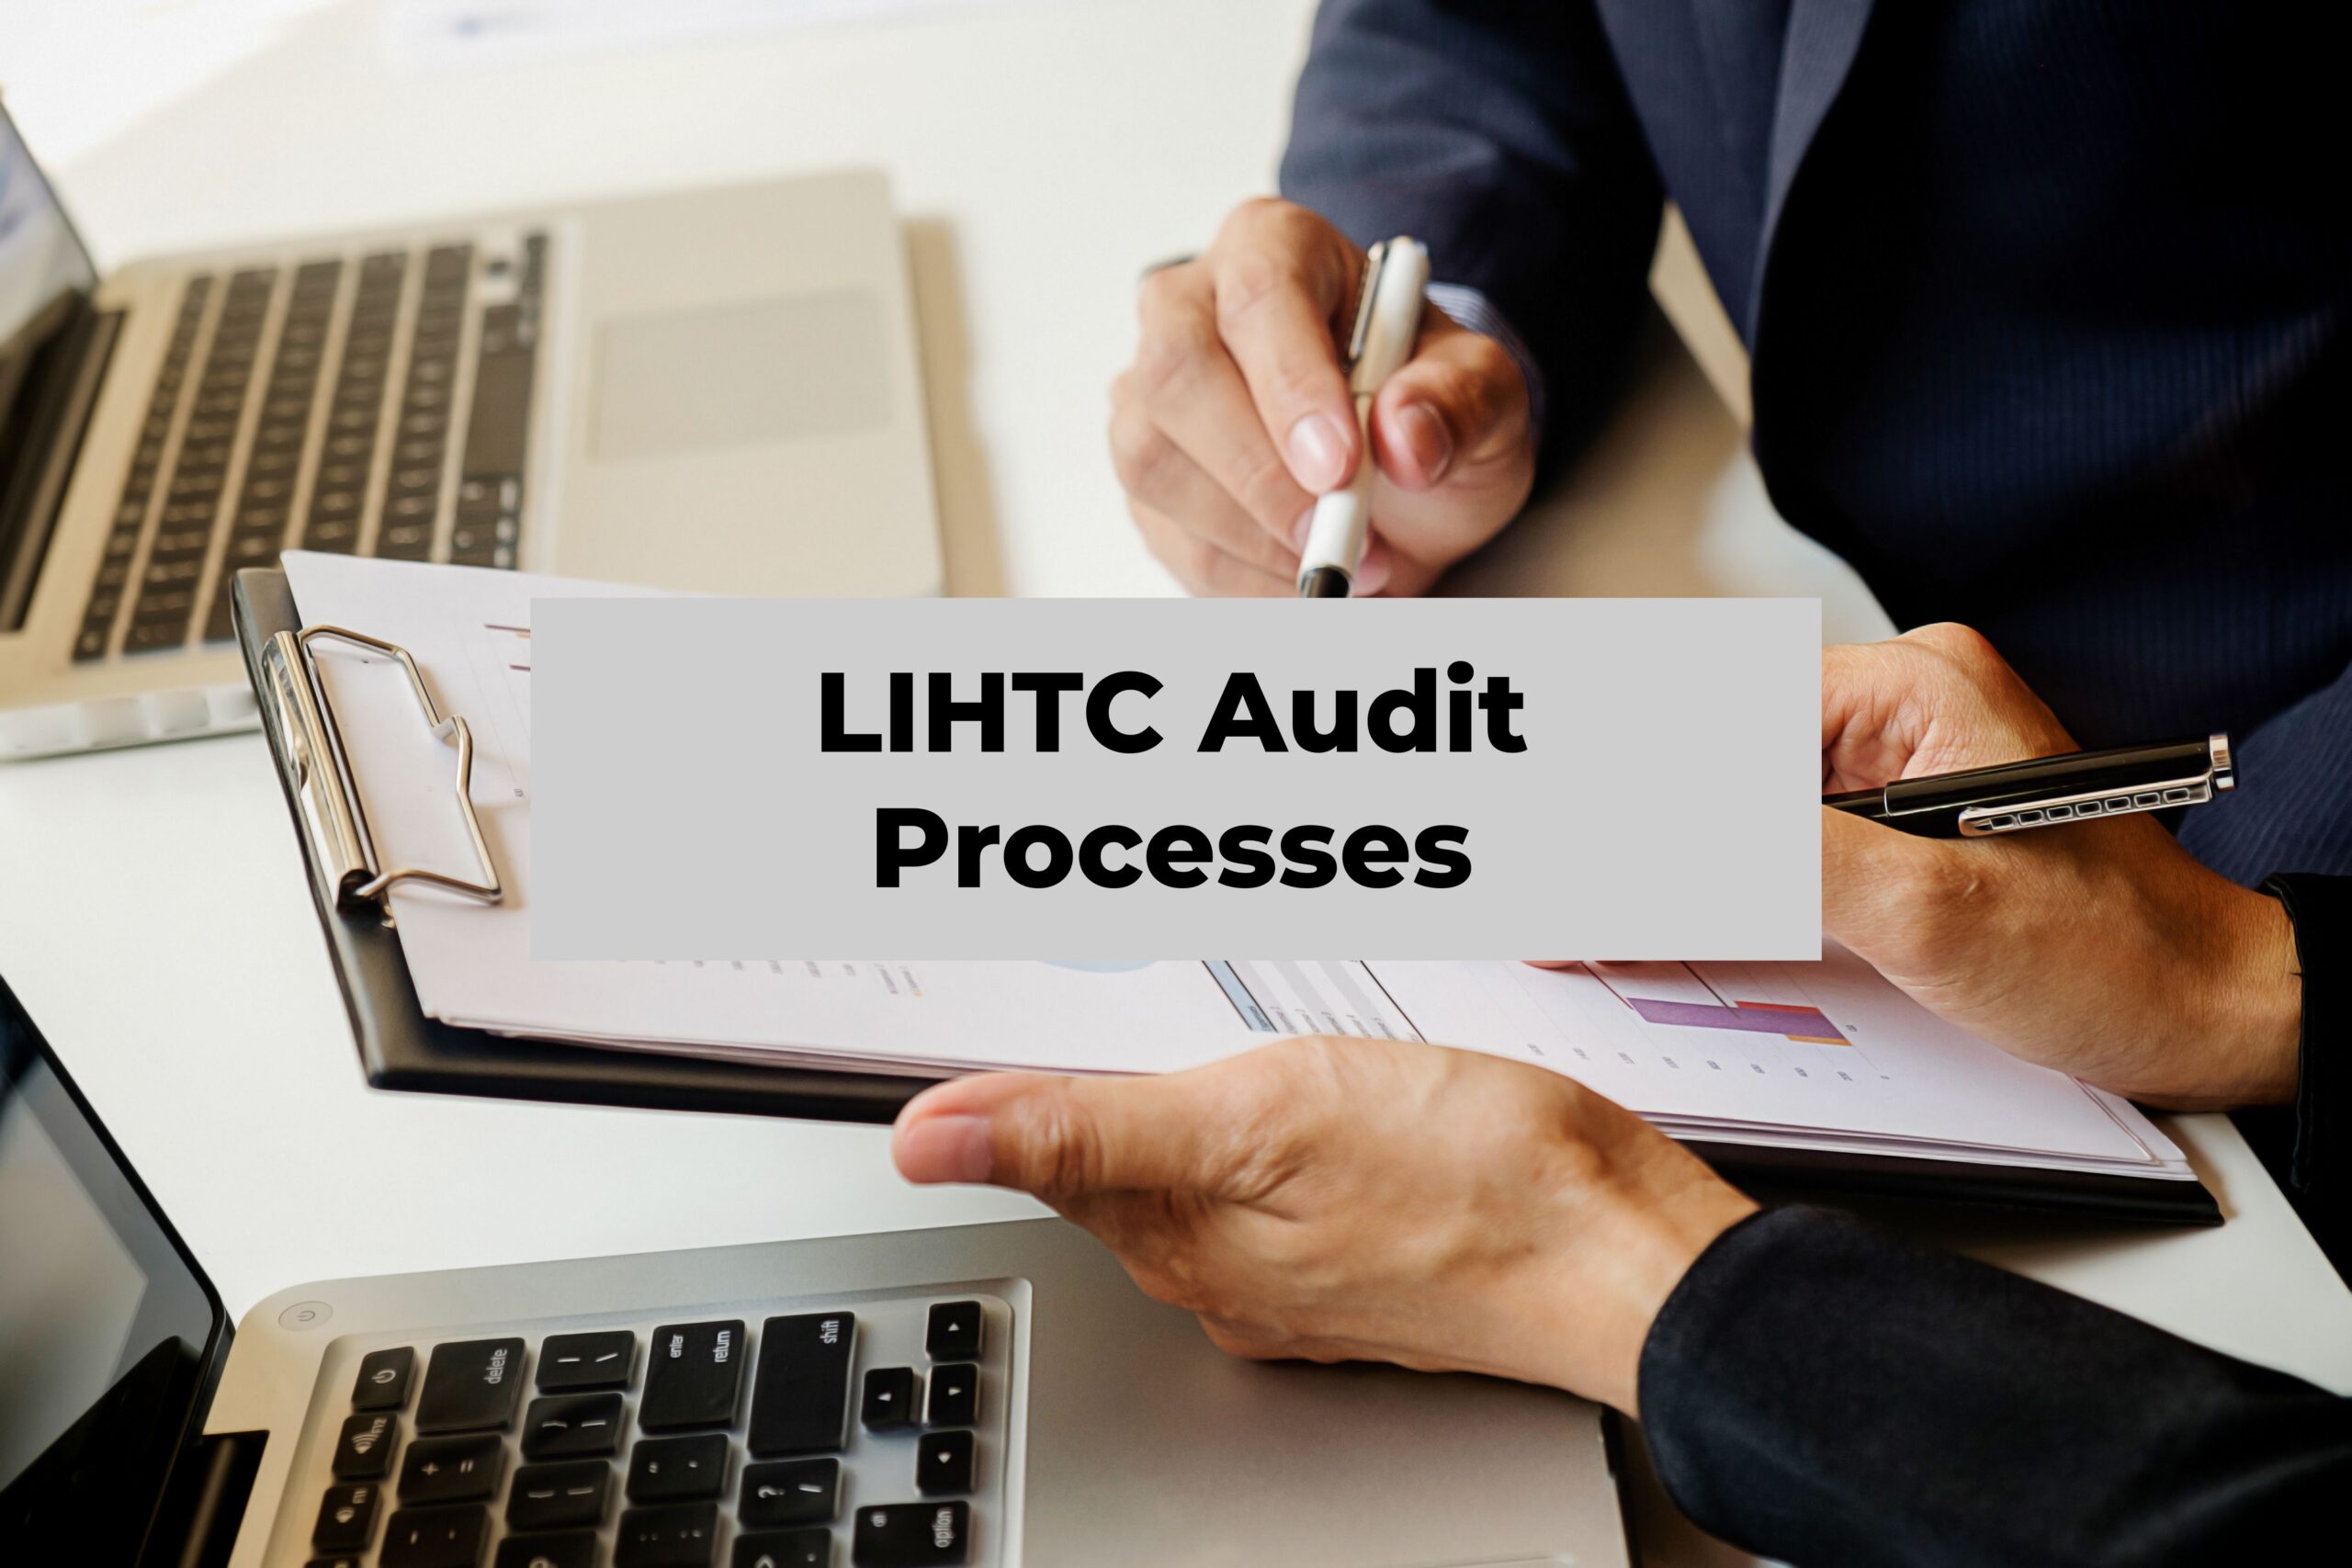 Untangling Responsibilities: The CPA Firm’s Contribution to LIHTC Audit Processes